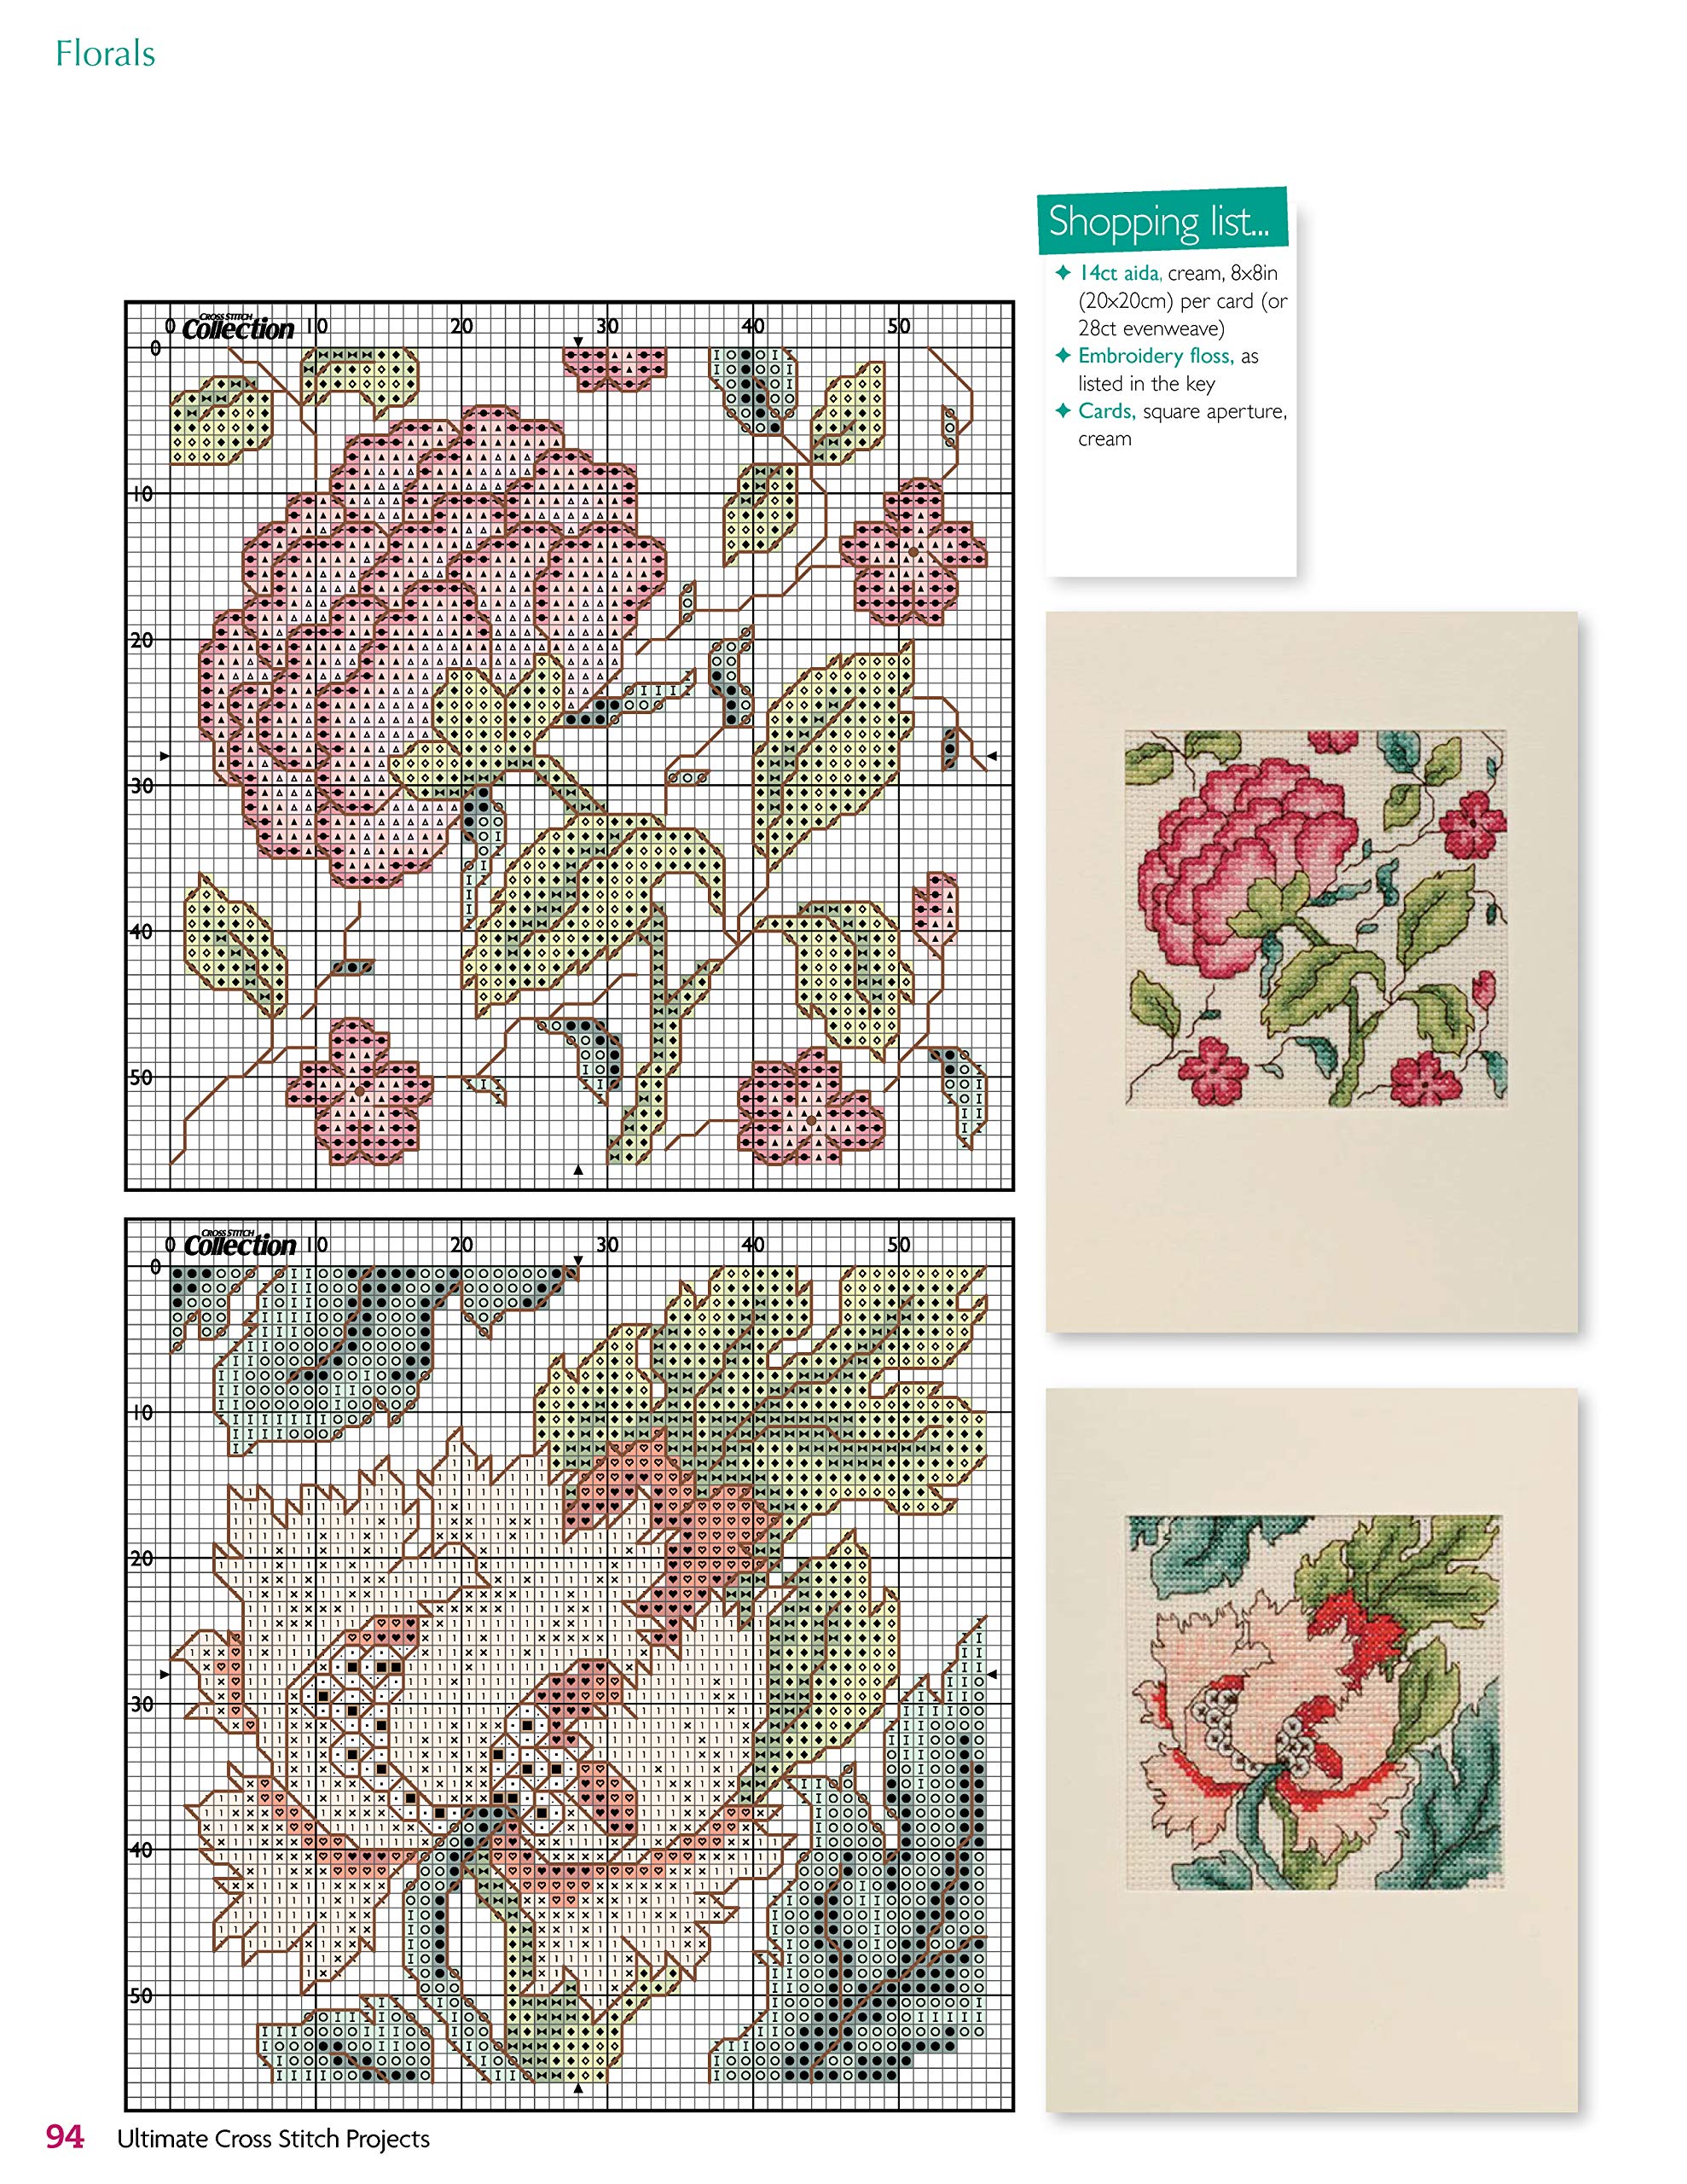 Ultimate Cross Stitch Projects: Colorful and Inspiring Designs from Maria Diaz (Design Originals) Sourcebook of Patterns with Detailed Step-by-Step Instructions and Clear, Easy-to-Follow Color Charts